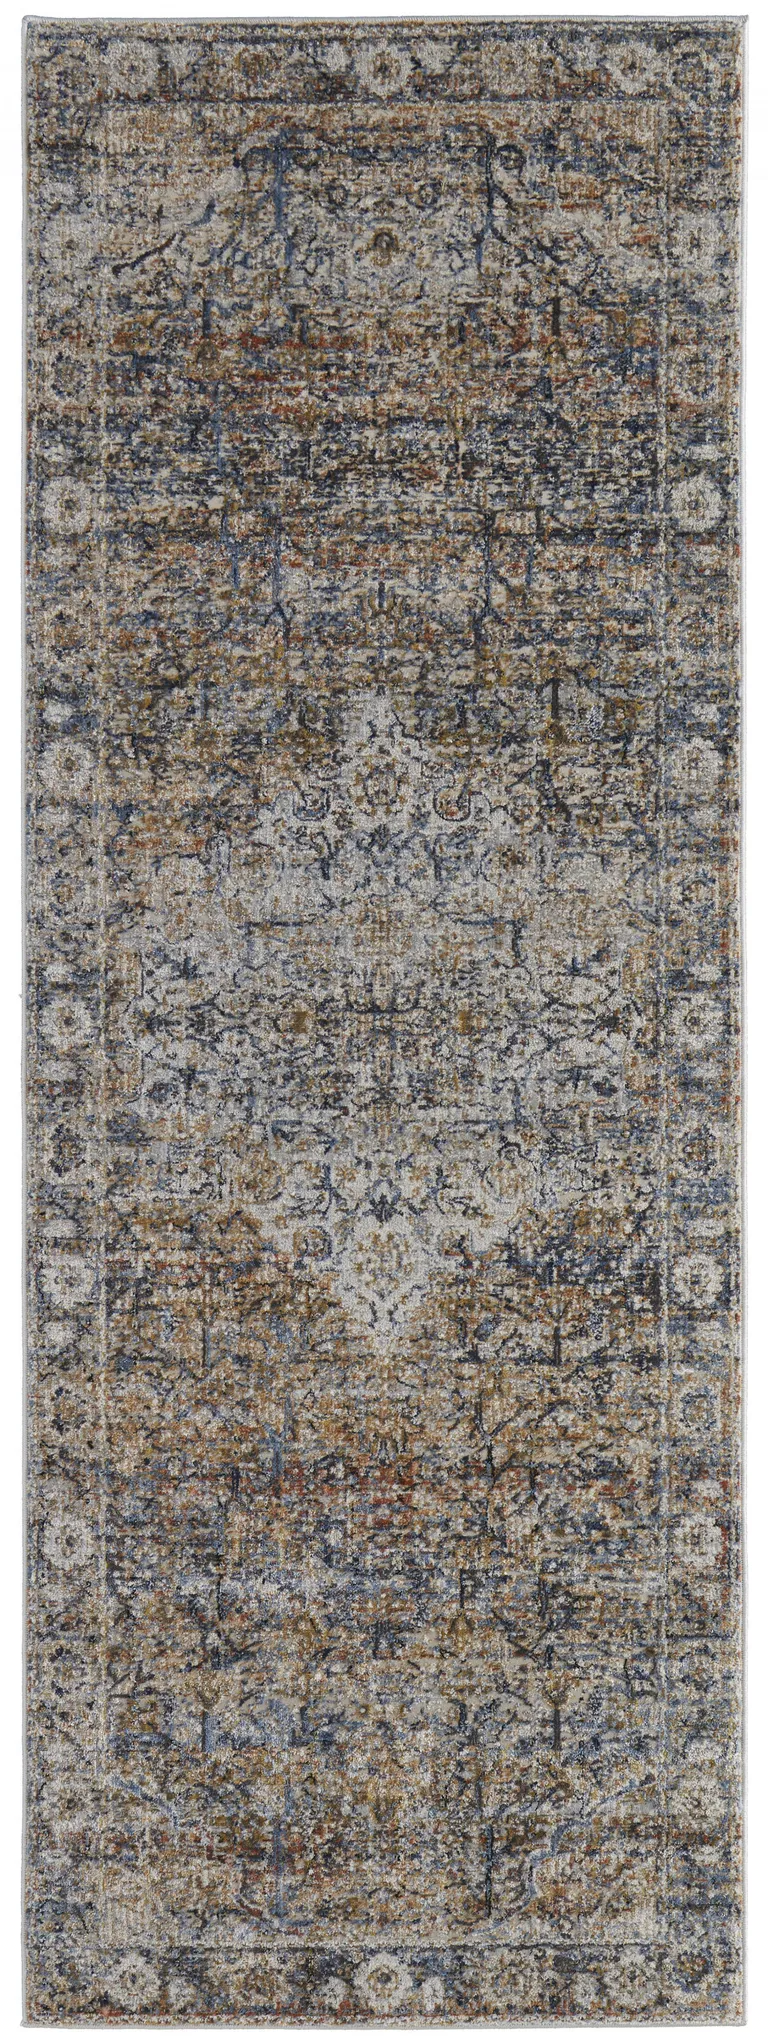 10' Tan Orange And Blue Floral Power Loom Distressed Runner Rug With Fringe Photo 1